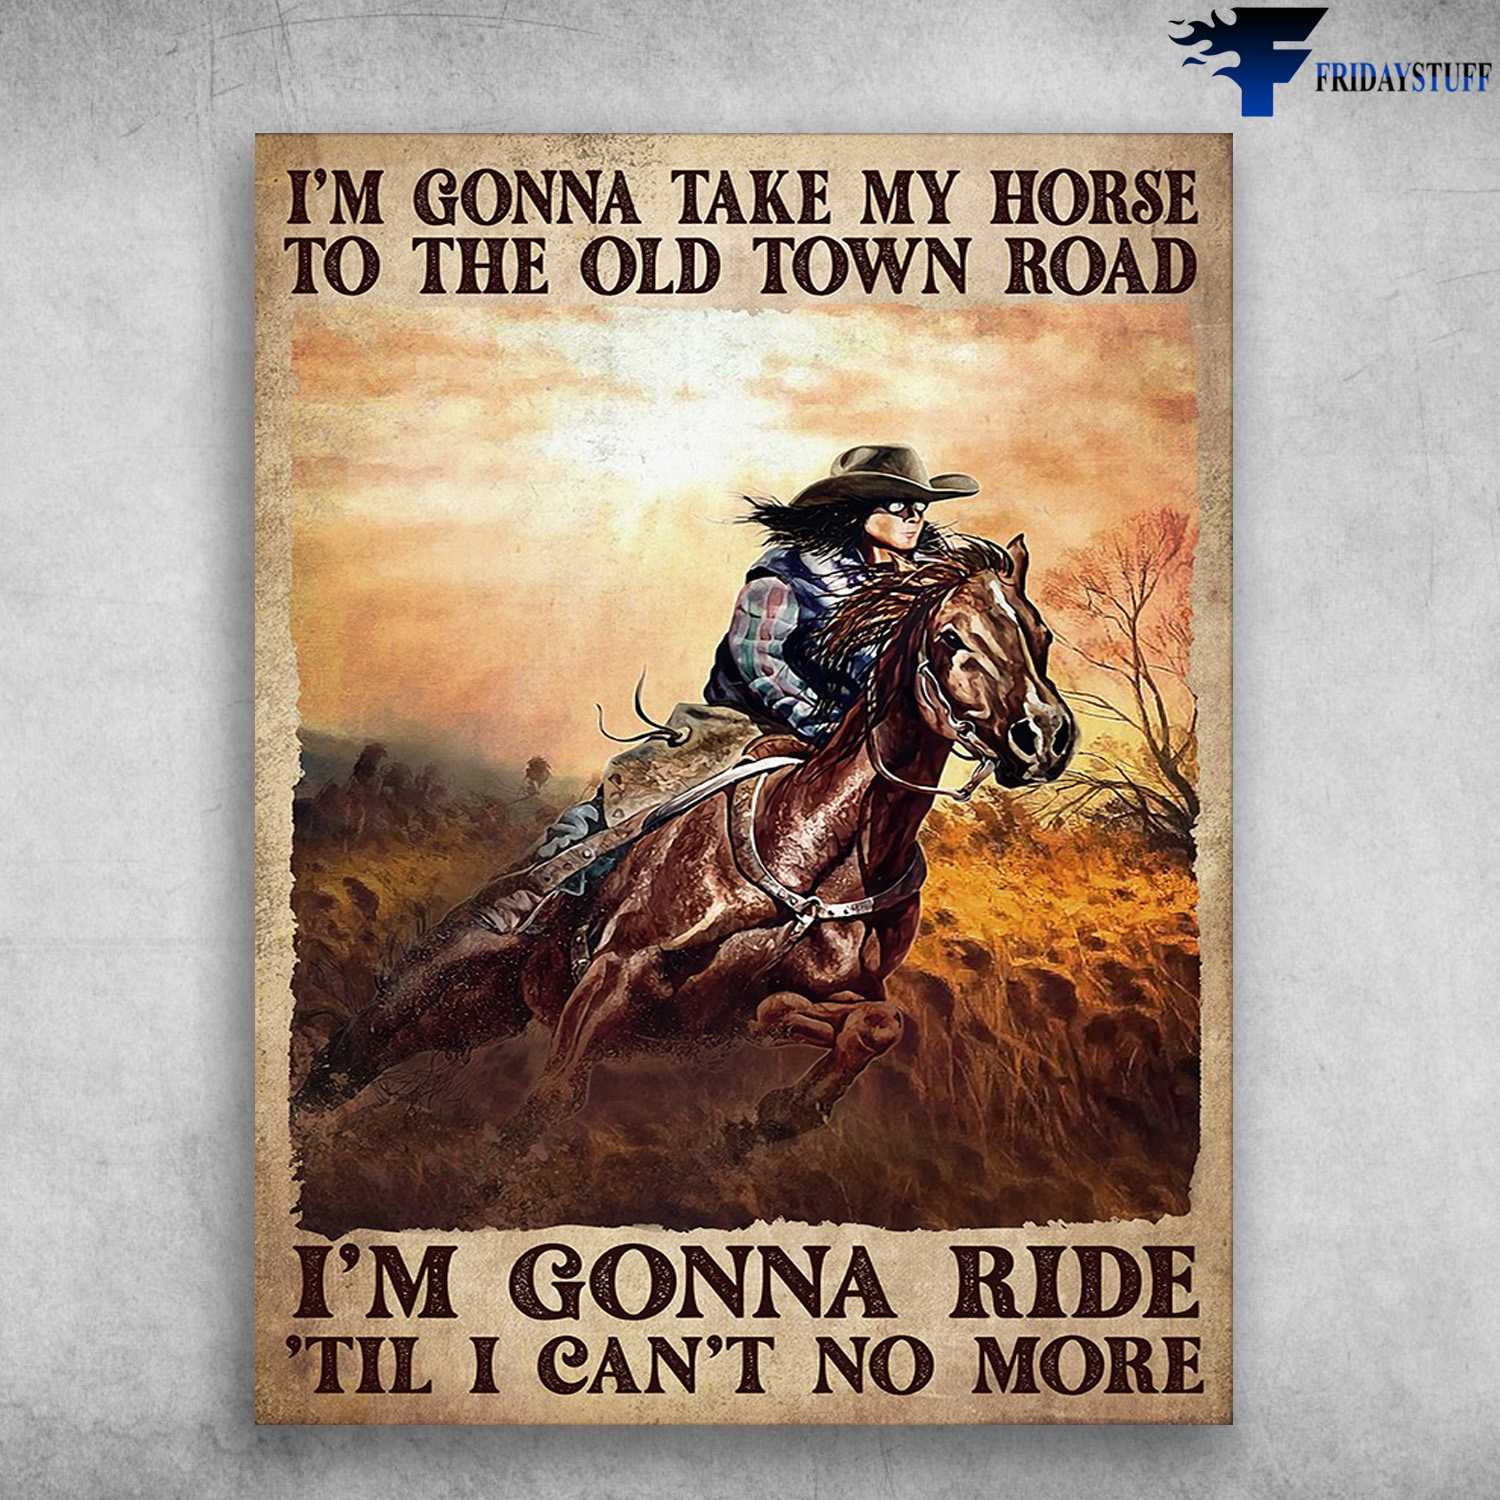 Cowboy Style, Horse Riding - I'm Gonna Take My Horse, To The Old Town Road, I'm Gonna Ride, 'till I Can's No More